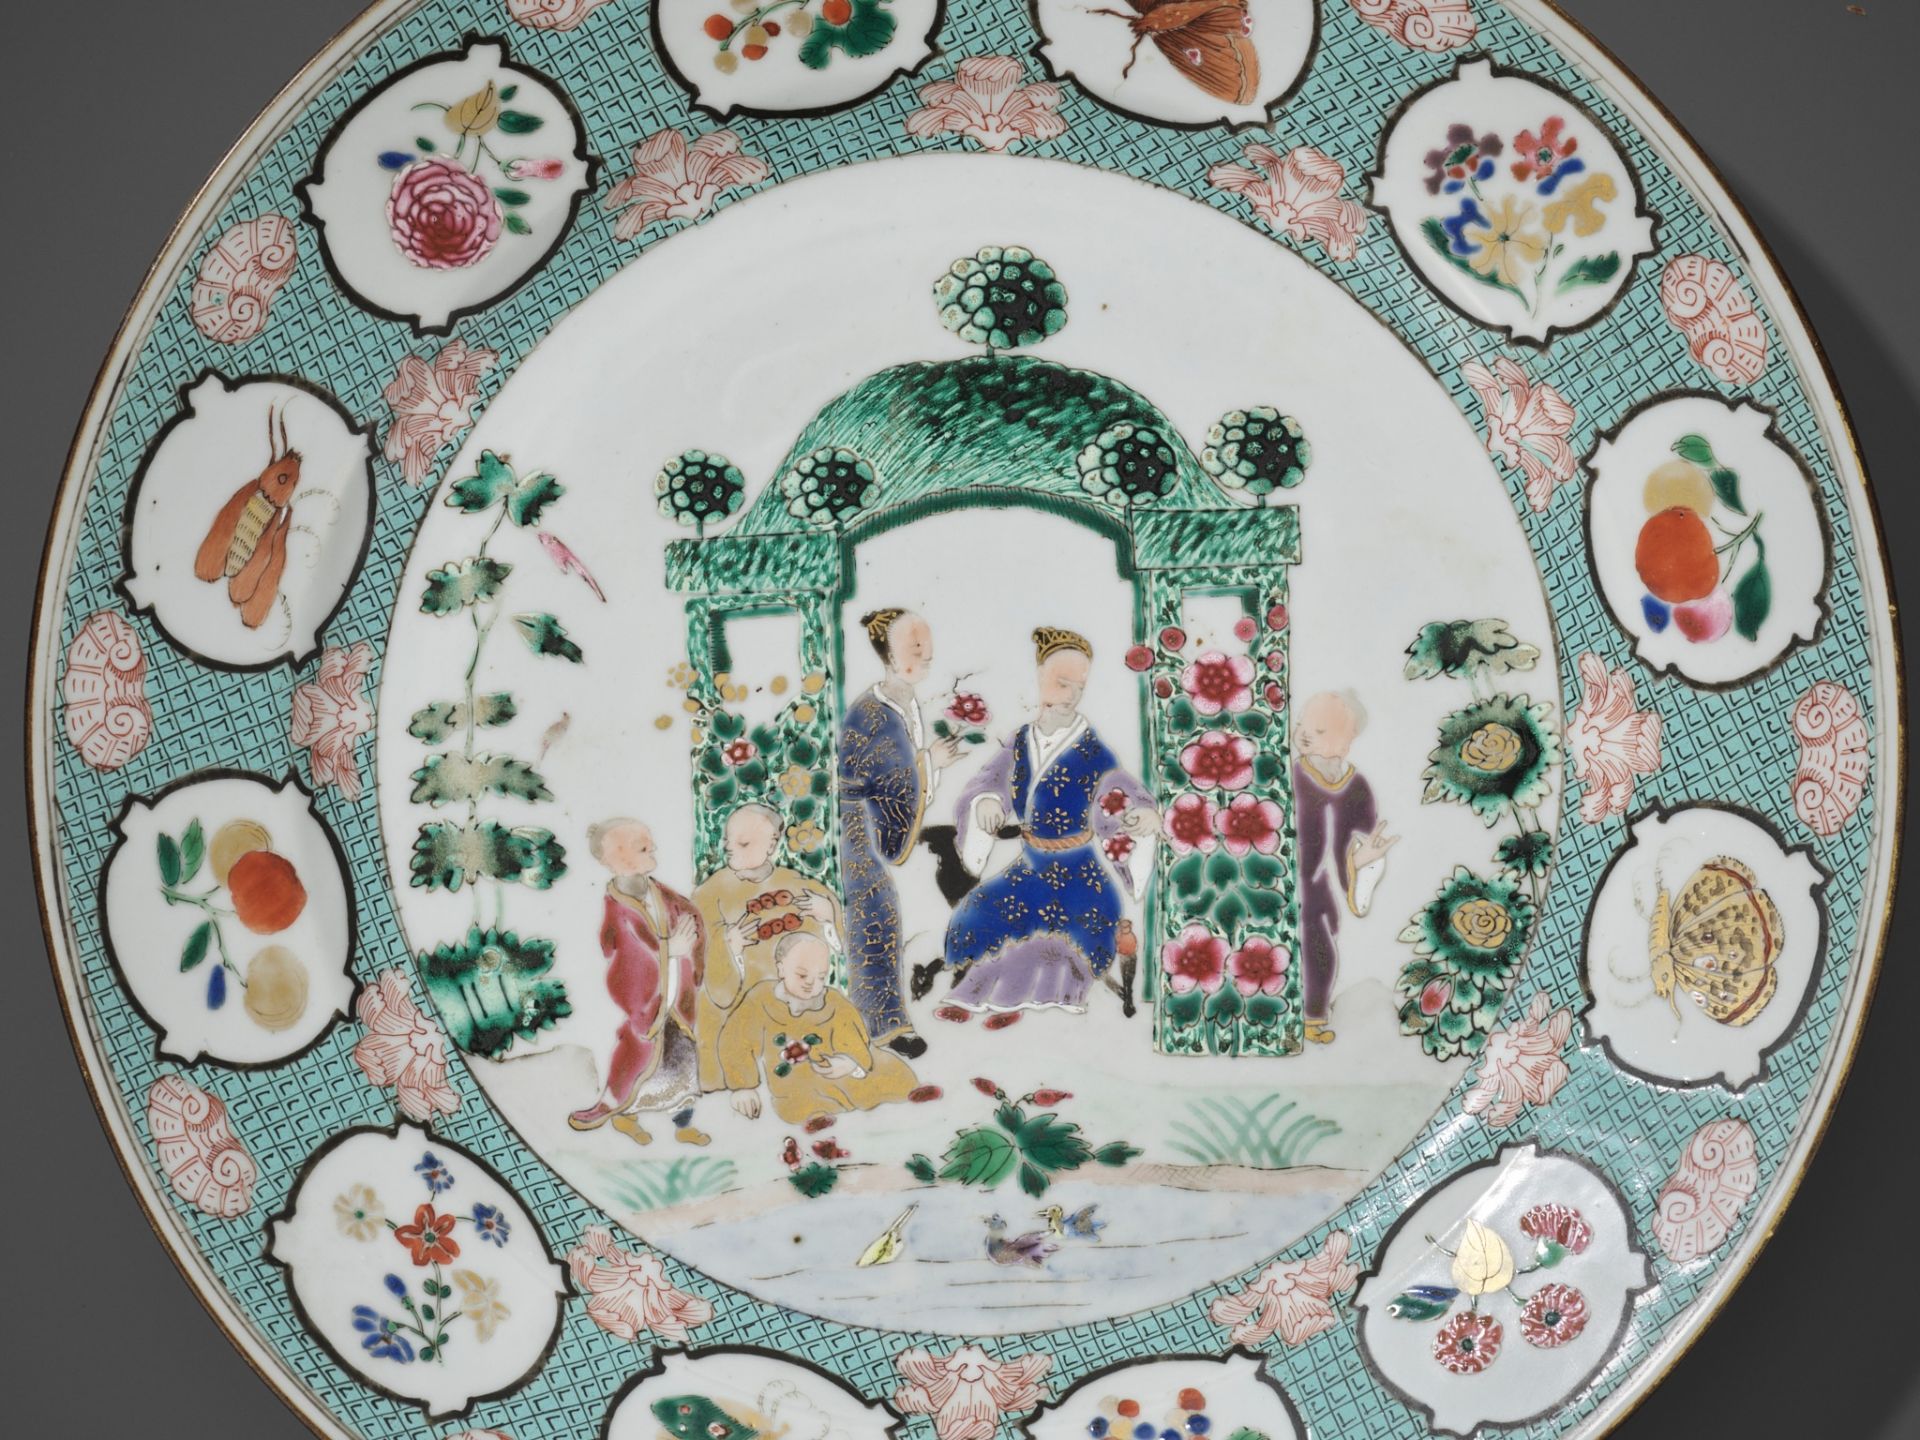 A FAMILLE ROSE 'IN THE ARBOR' DISH BY CORNELIUS PRONK, CHINA, 1735-1740 - Image 6 of 14